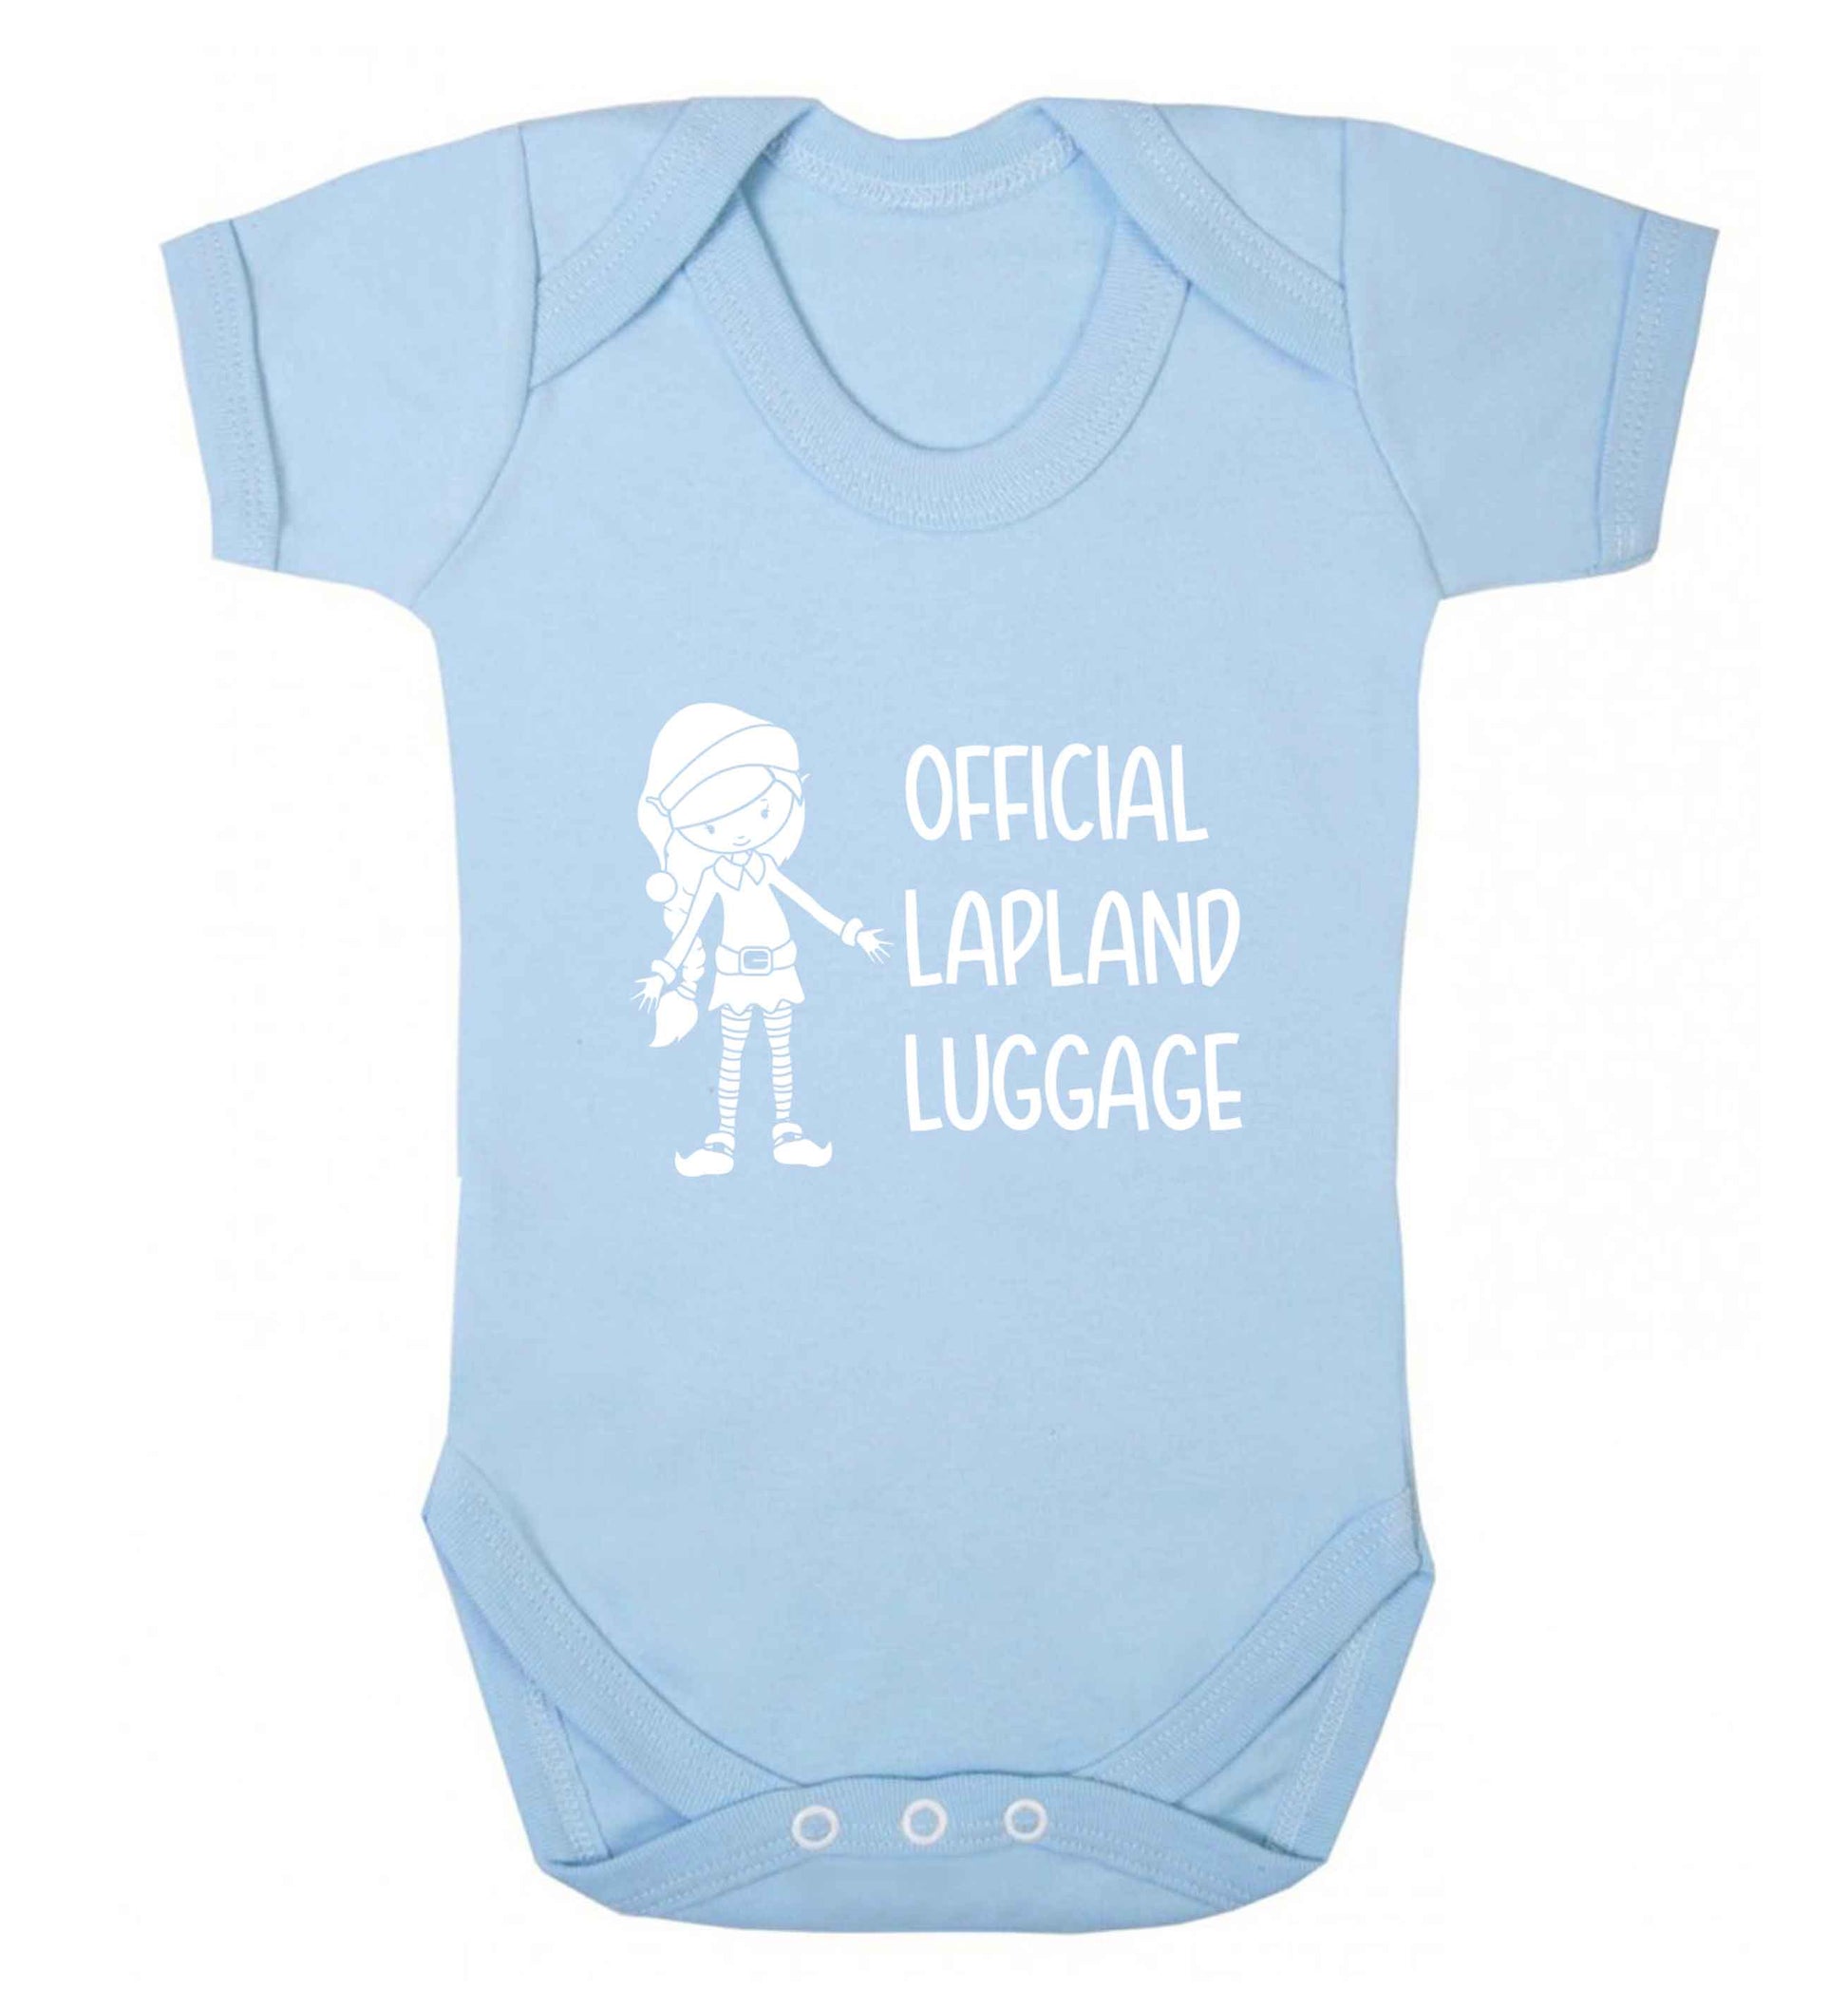 Official lapland luggage - Elf snowflake baby vest pale blue 18-24 months